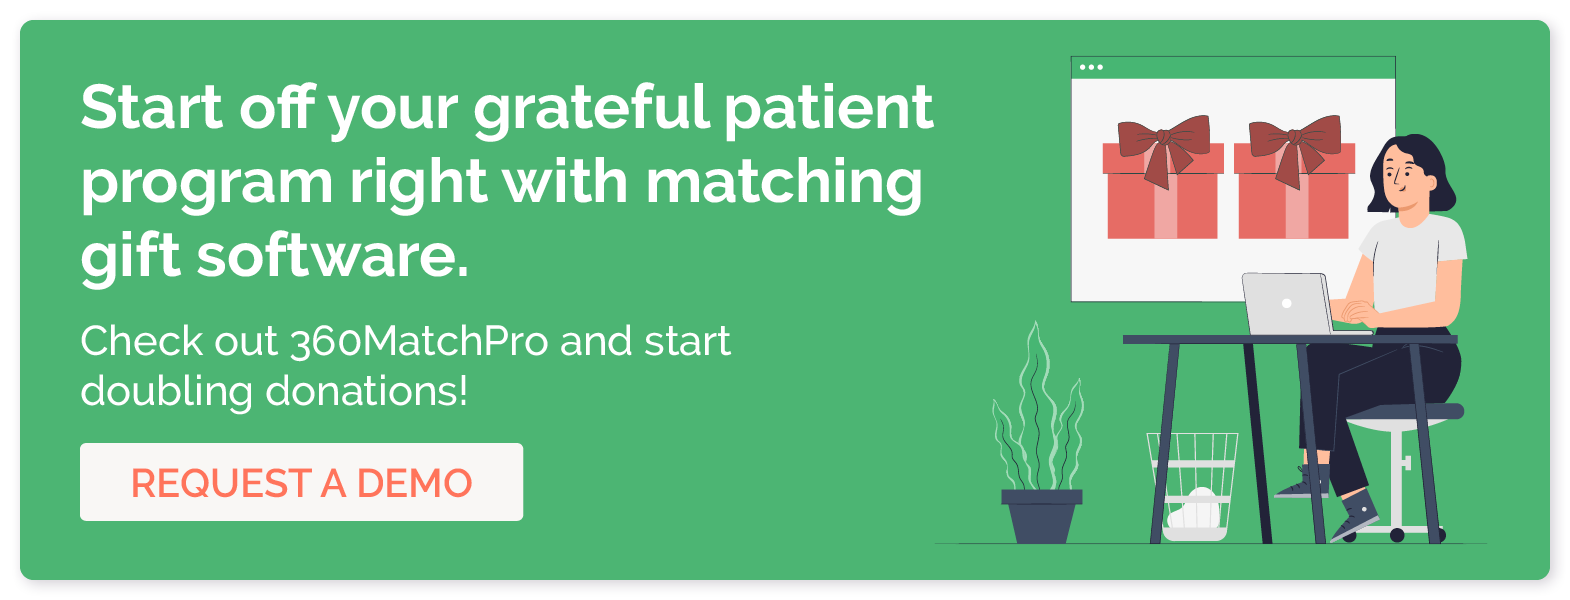 Start off your grateful patient program right with matching gift software. Check out 360MatchPro and start doubling donations! Request a demo.